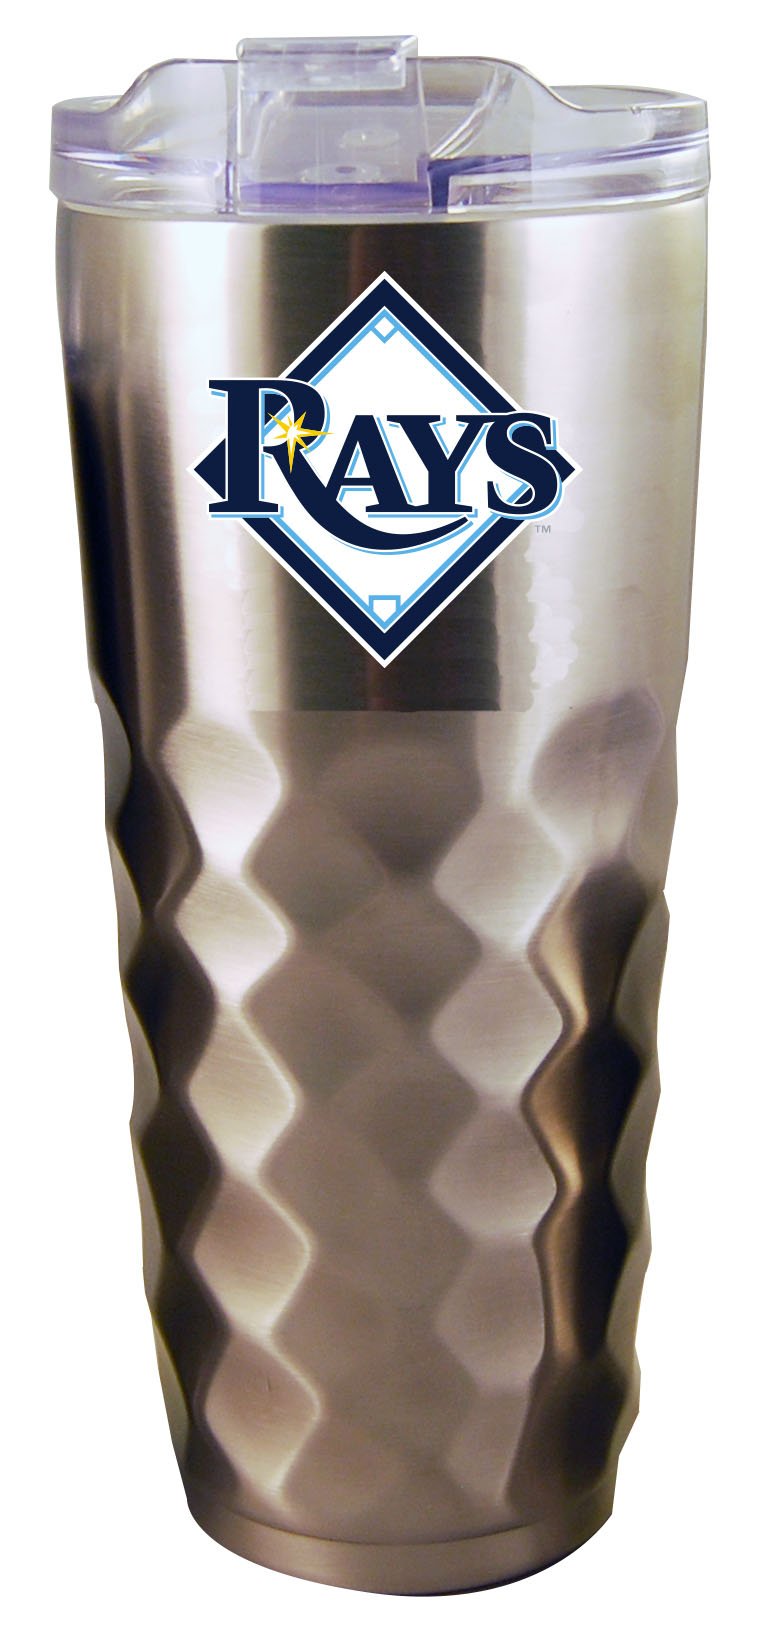 32OZ SS DIAMD TMBLR RAYS
CurrentProduct, Drinkware_category_All, MLB, Tampa Bay Rays, TBD
The Memory Company